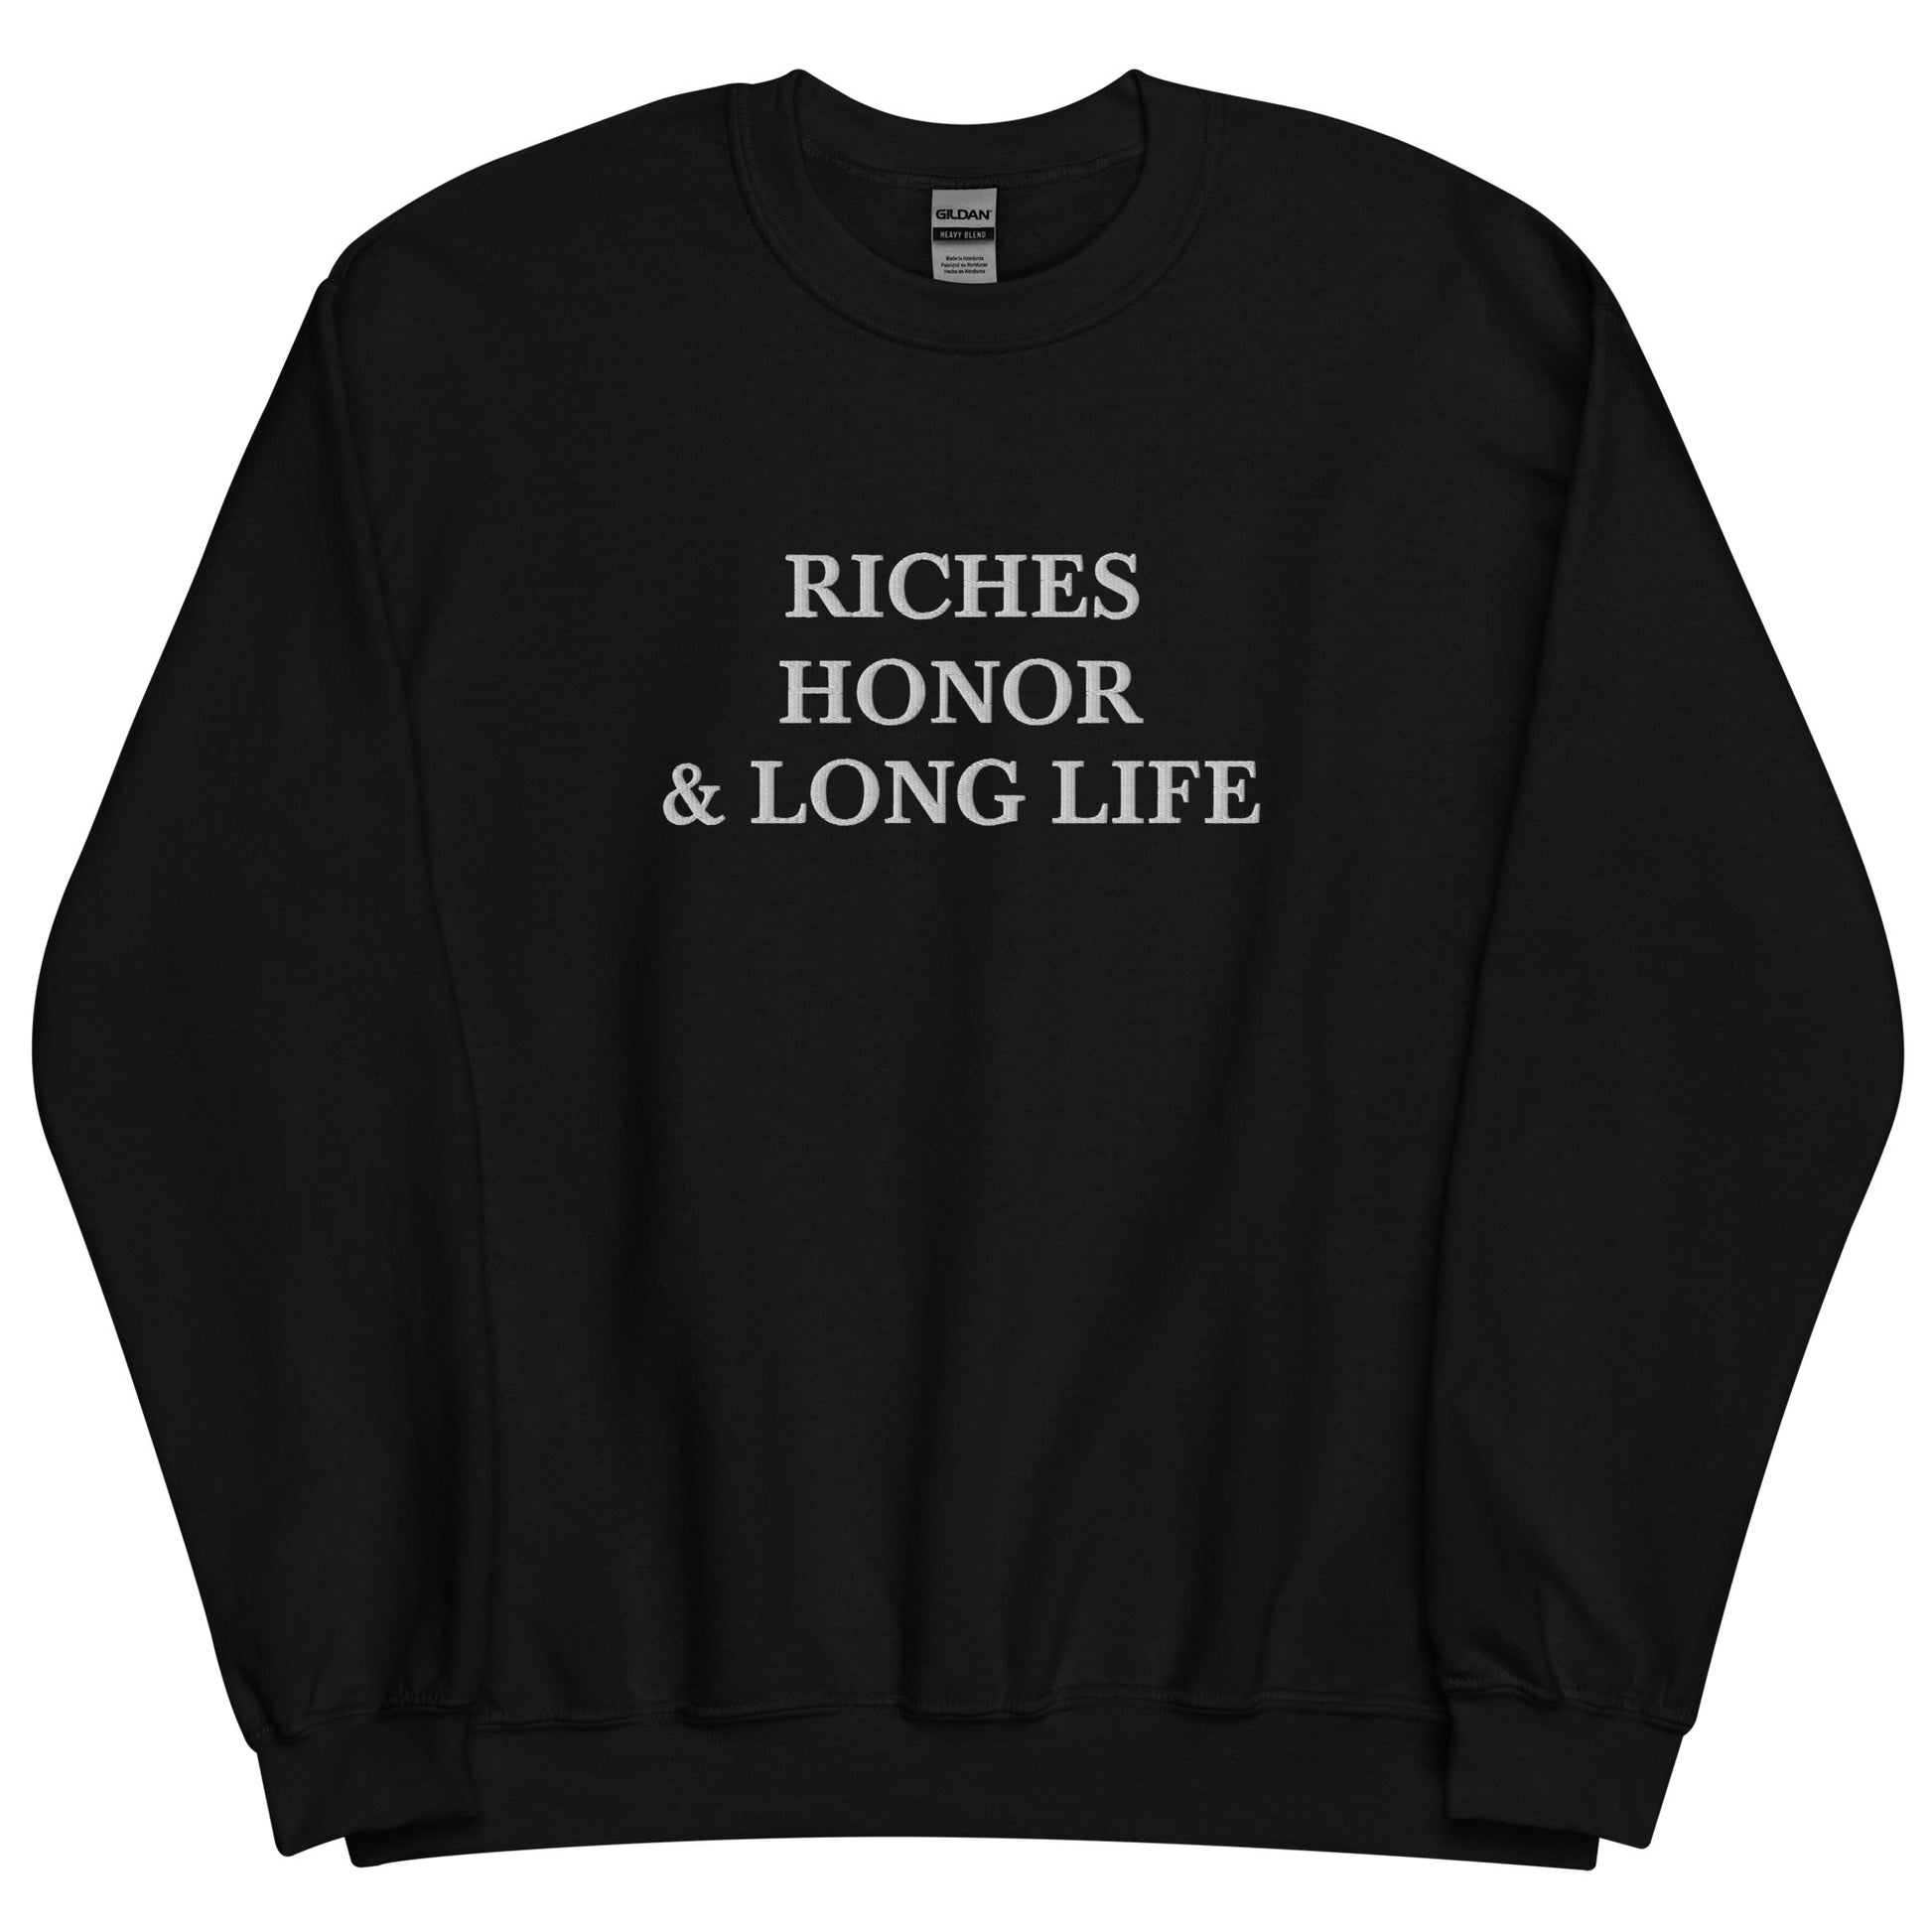 Embroidered Riches Honor & Long Life Crewneck Sweatshirt-clothes- sweater-Black-S-mysticalcherry